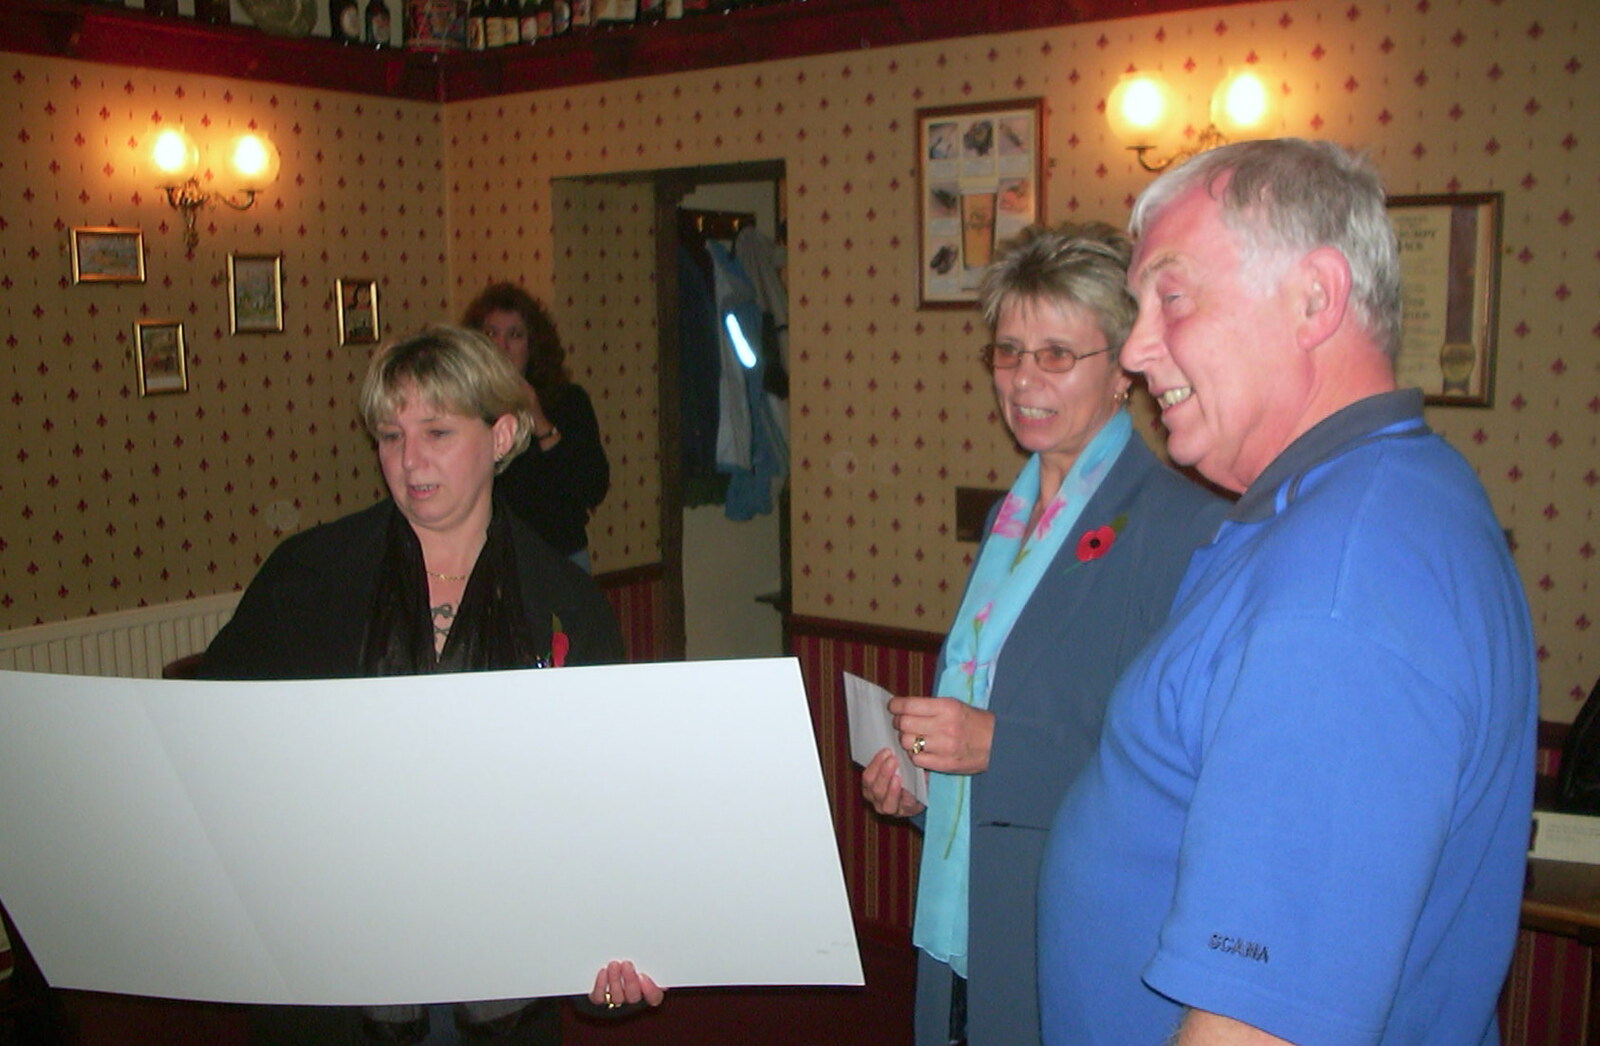 A BSCC Presentation, Brome Swan, Suffolk - 9th November 2002: A massive novelty cheque is presented